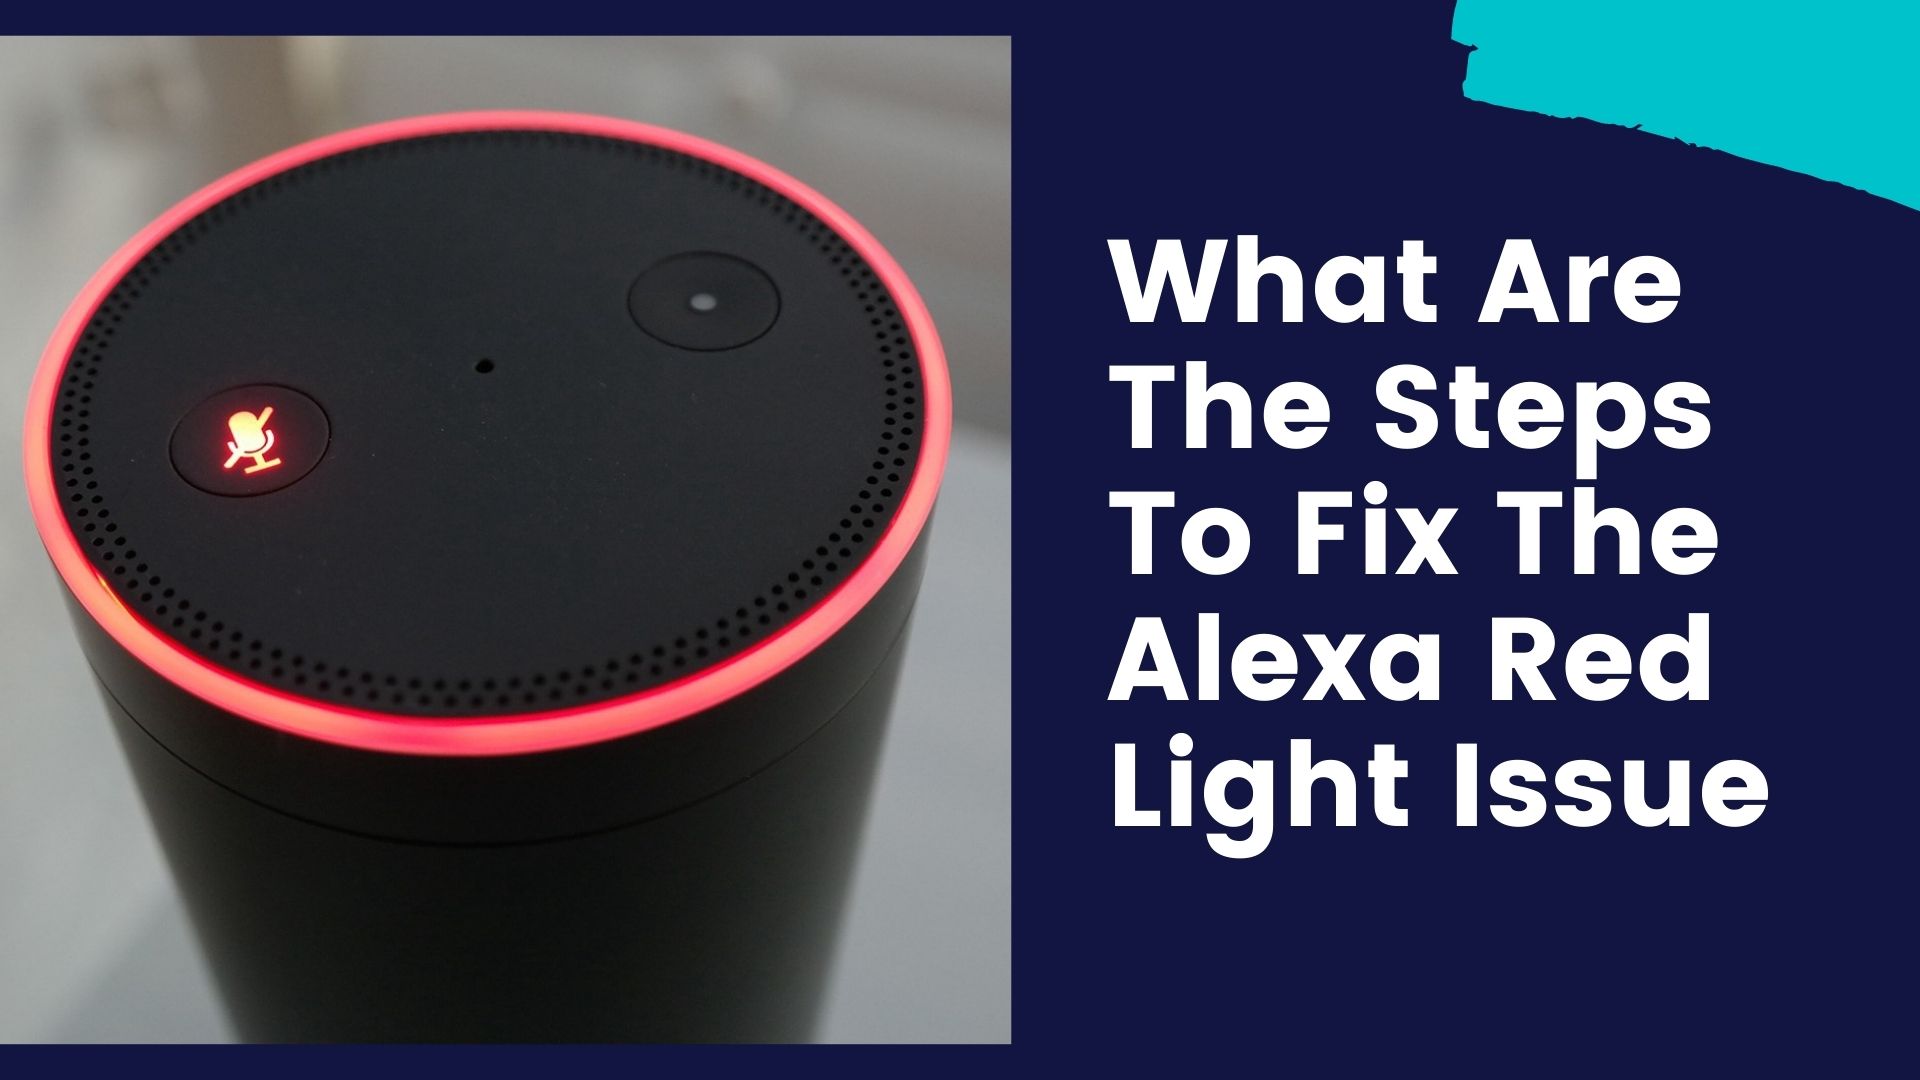 Alexa Red Ring Means and Steps to Fix Red Ring Issues